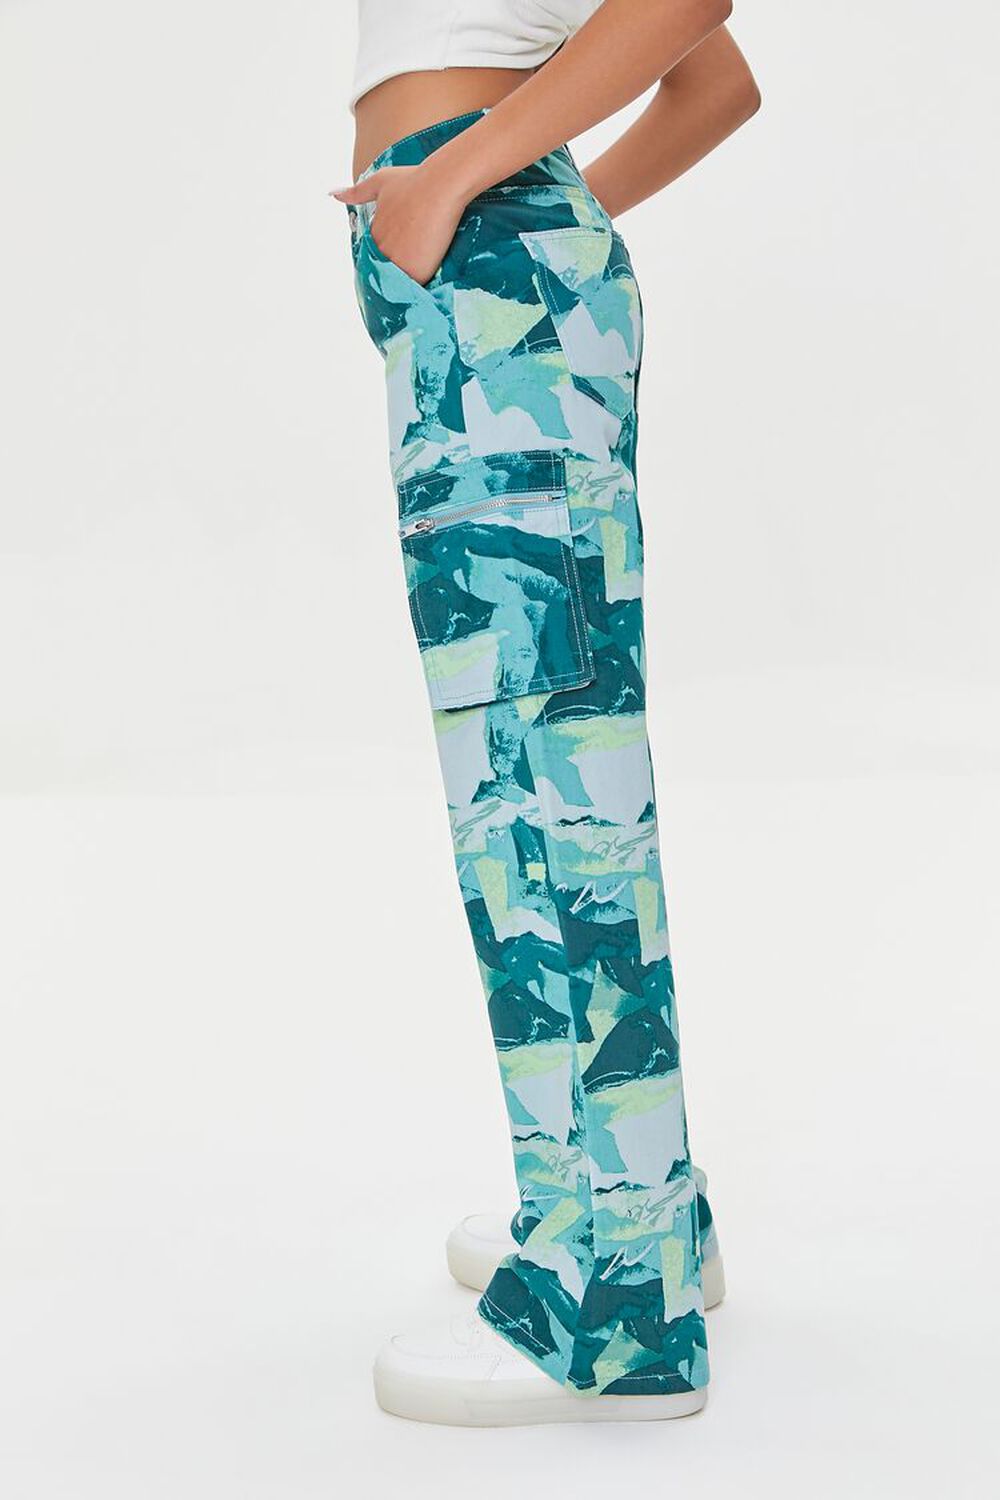 PEACOCK/MULTI Abstract Print Cargo Pants, image 3